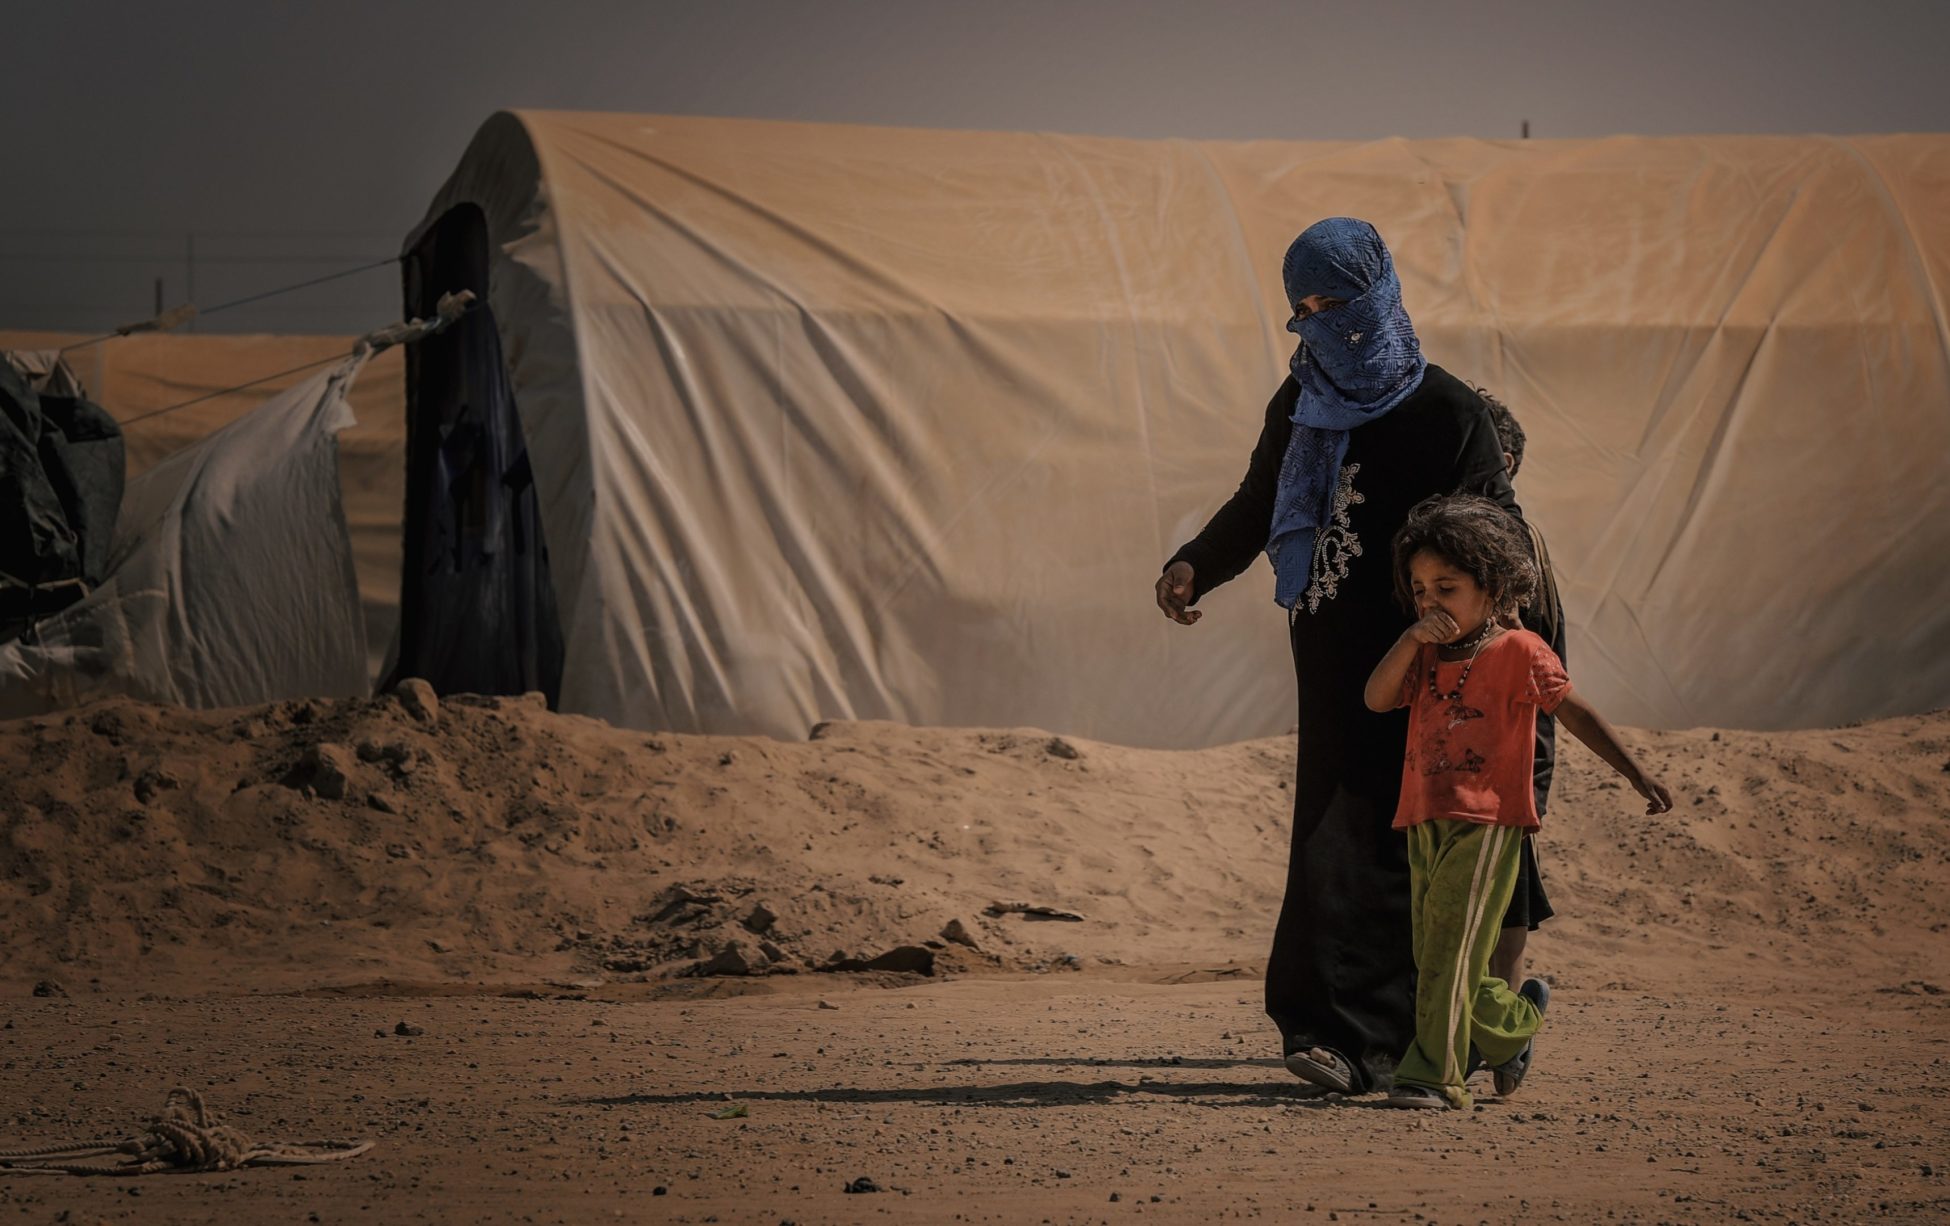 A woman and her young child walk in the middle of the desert passing by a large makeshift shelter for displaced people.